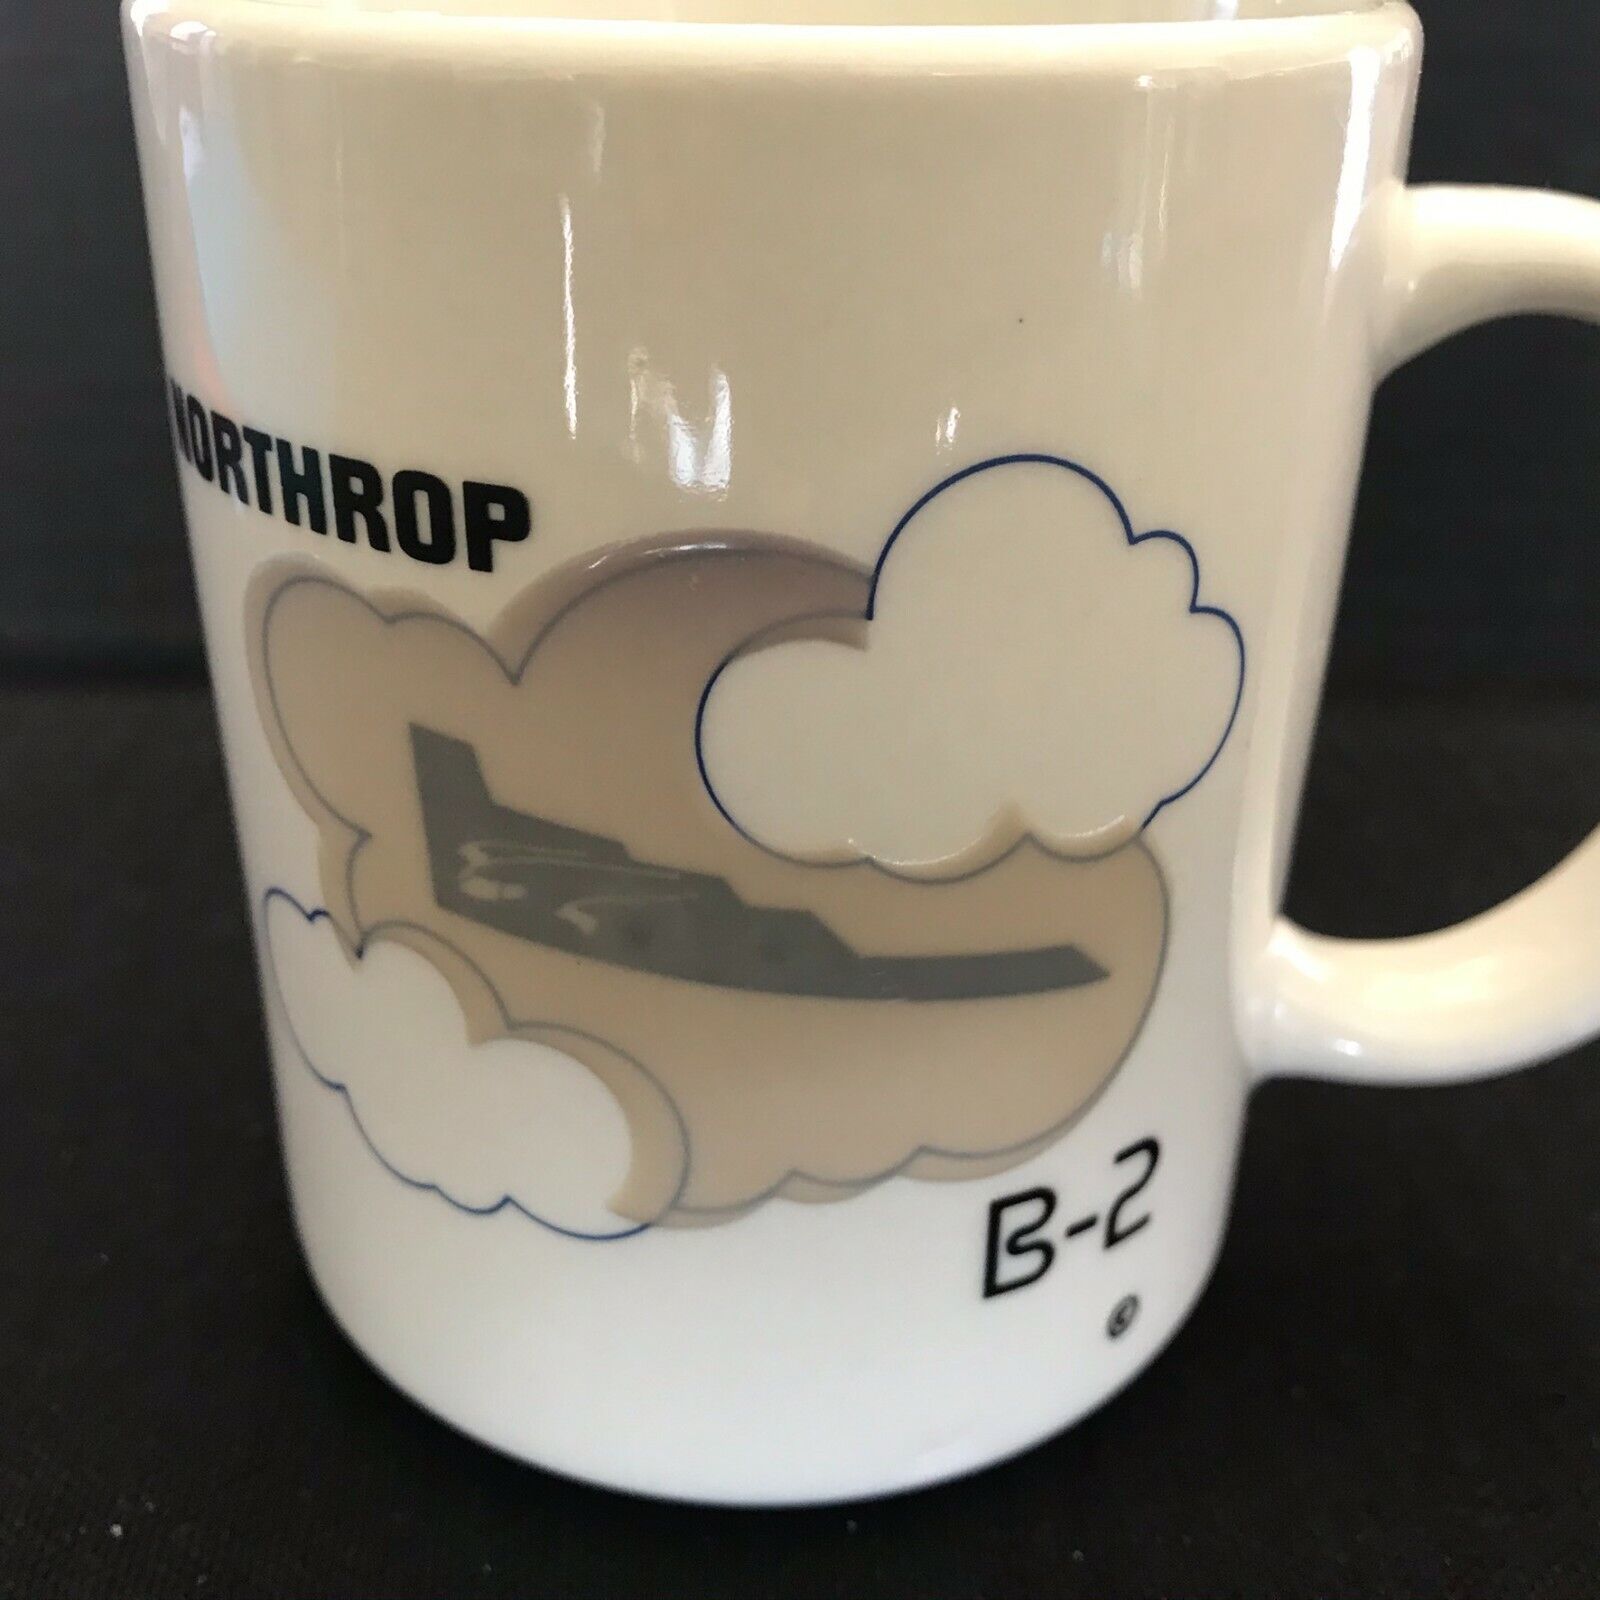  Vintage Coffee Mug Northrop B-2 Stealth Bomber Pic Changes with Hot Liquid 